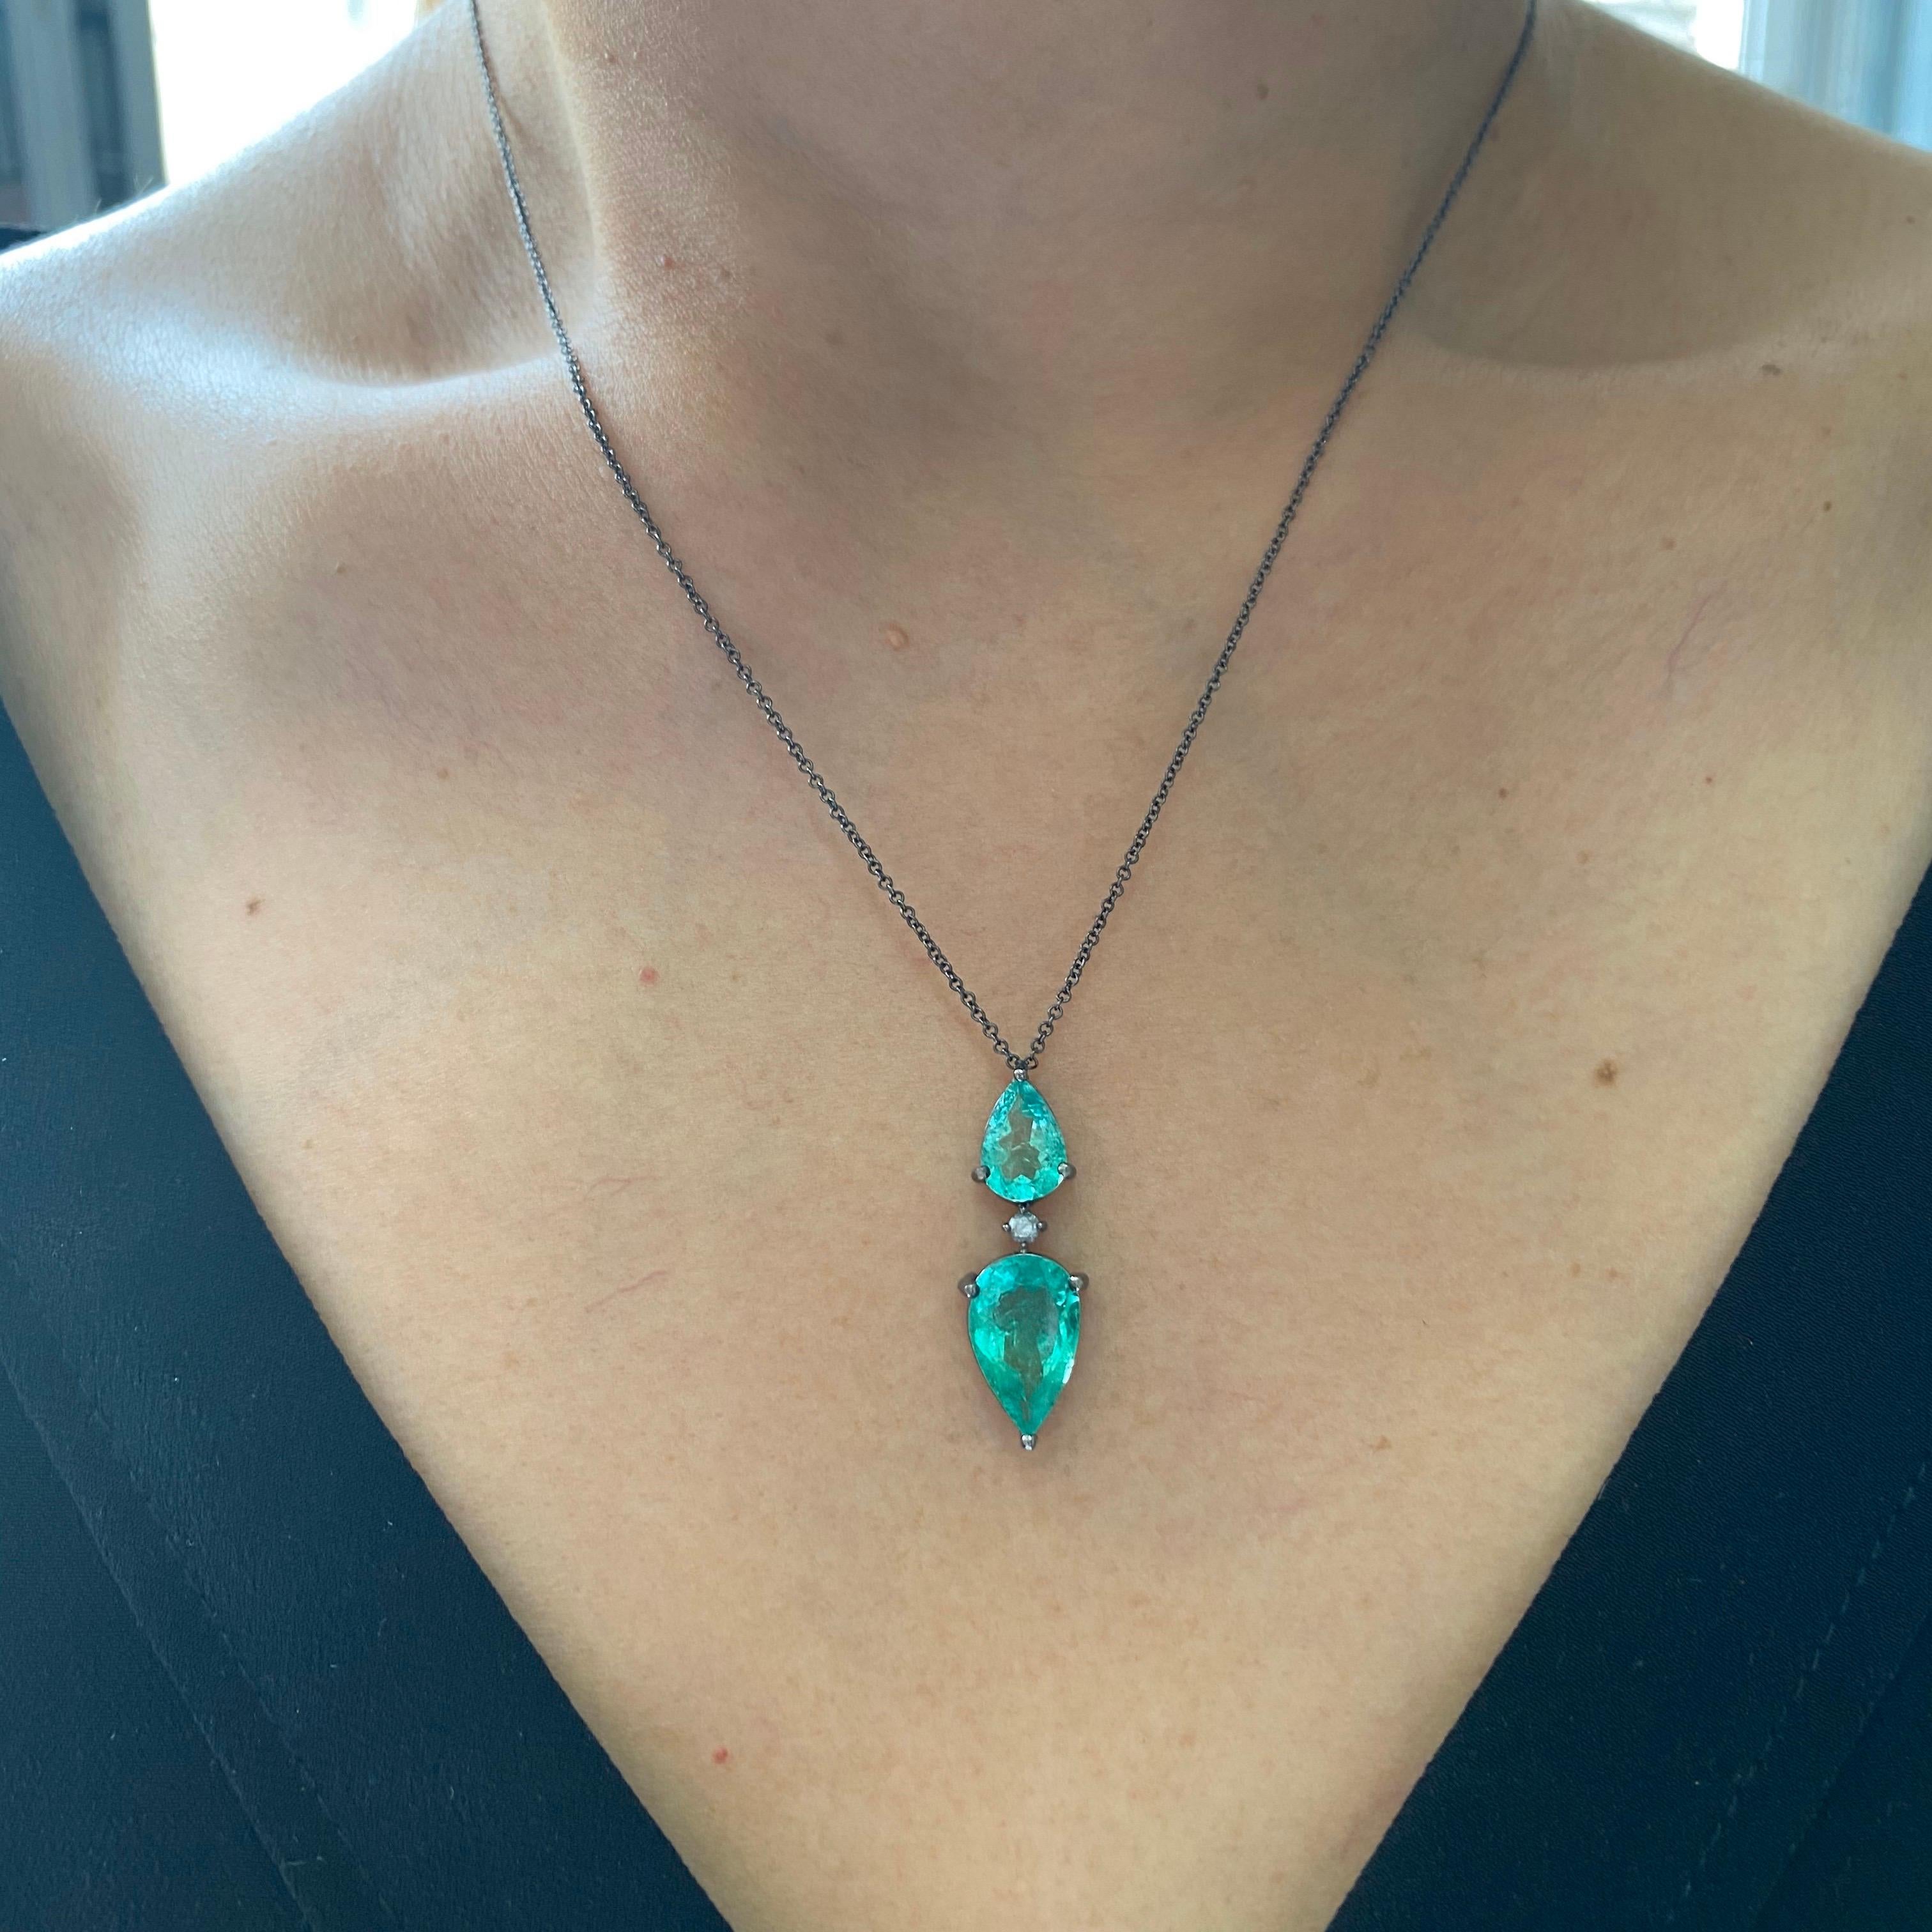 A simple, modern looking 3.87 carat Colombian Emerald pendant attached to 16 inch chain, all set in black rhodium plated 18K Gold. Certificate can be provided upon request. A video can be provided as well. The length of the chain can be altered,